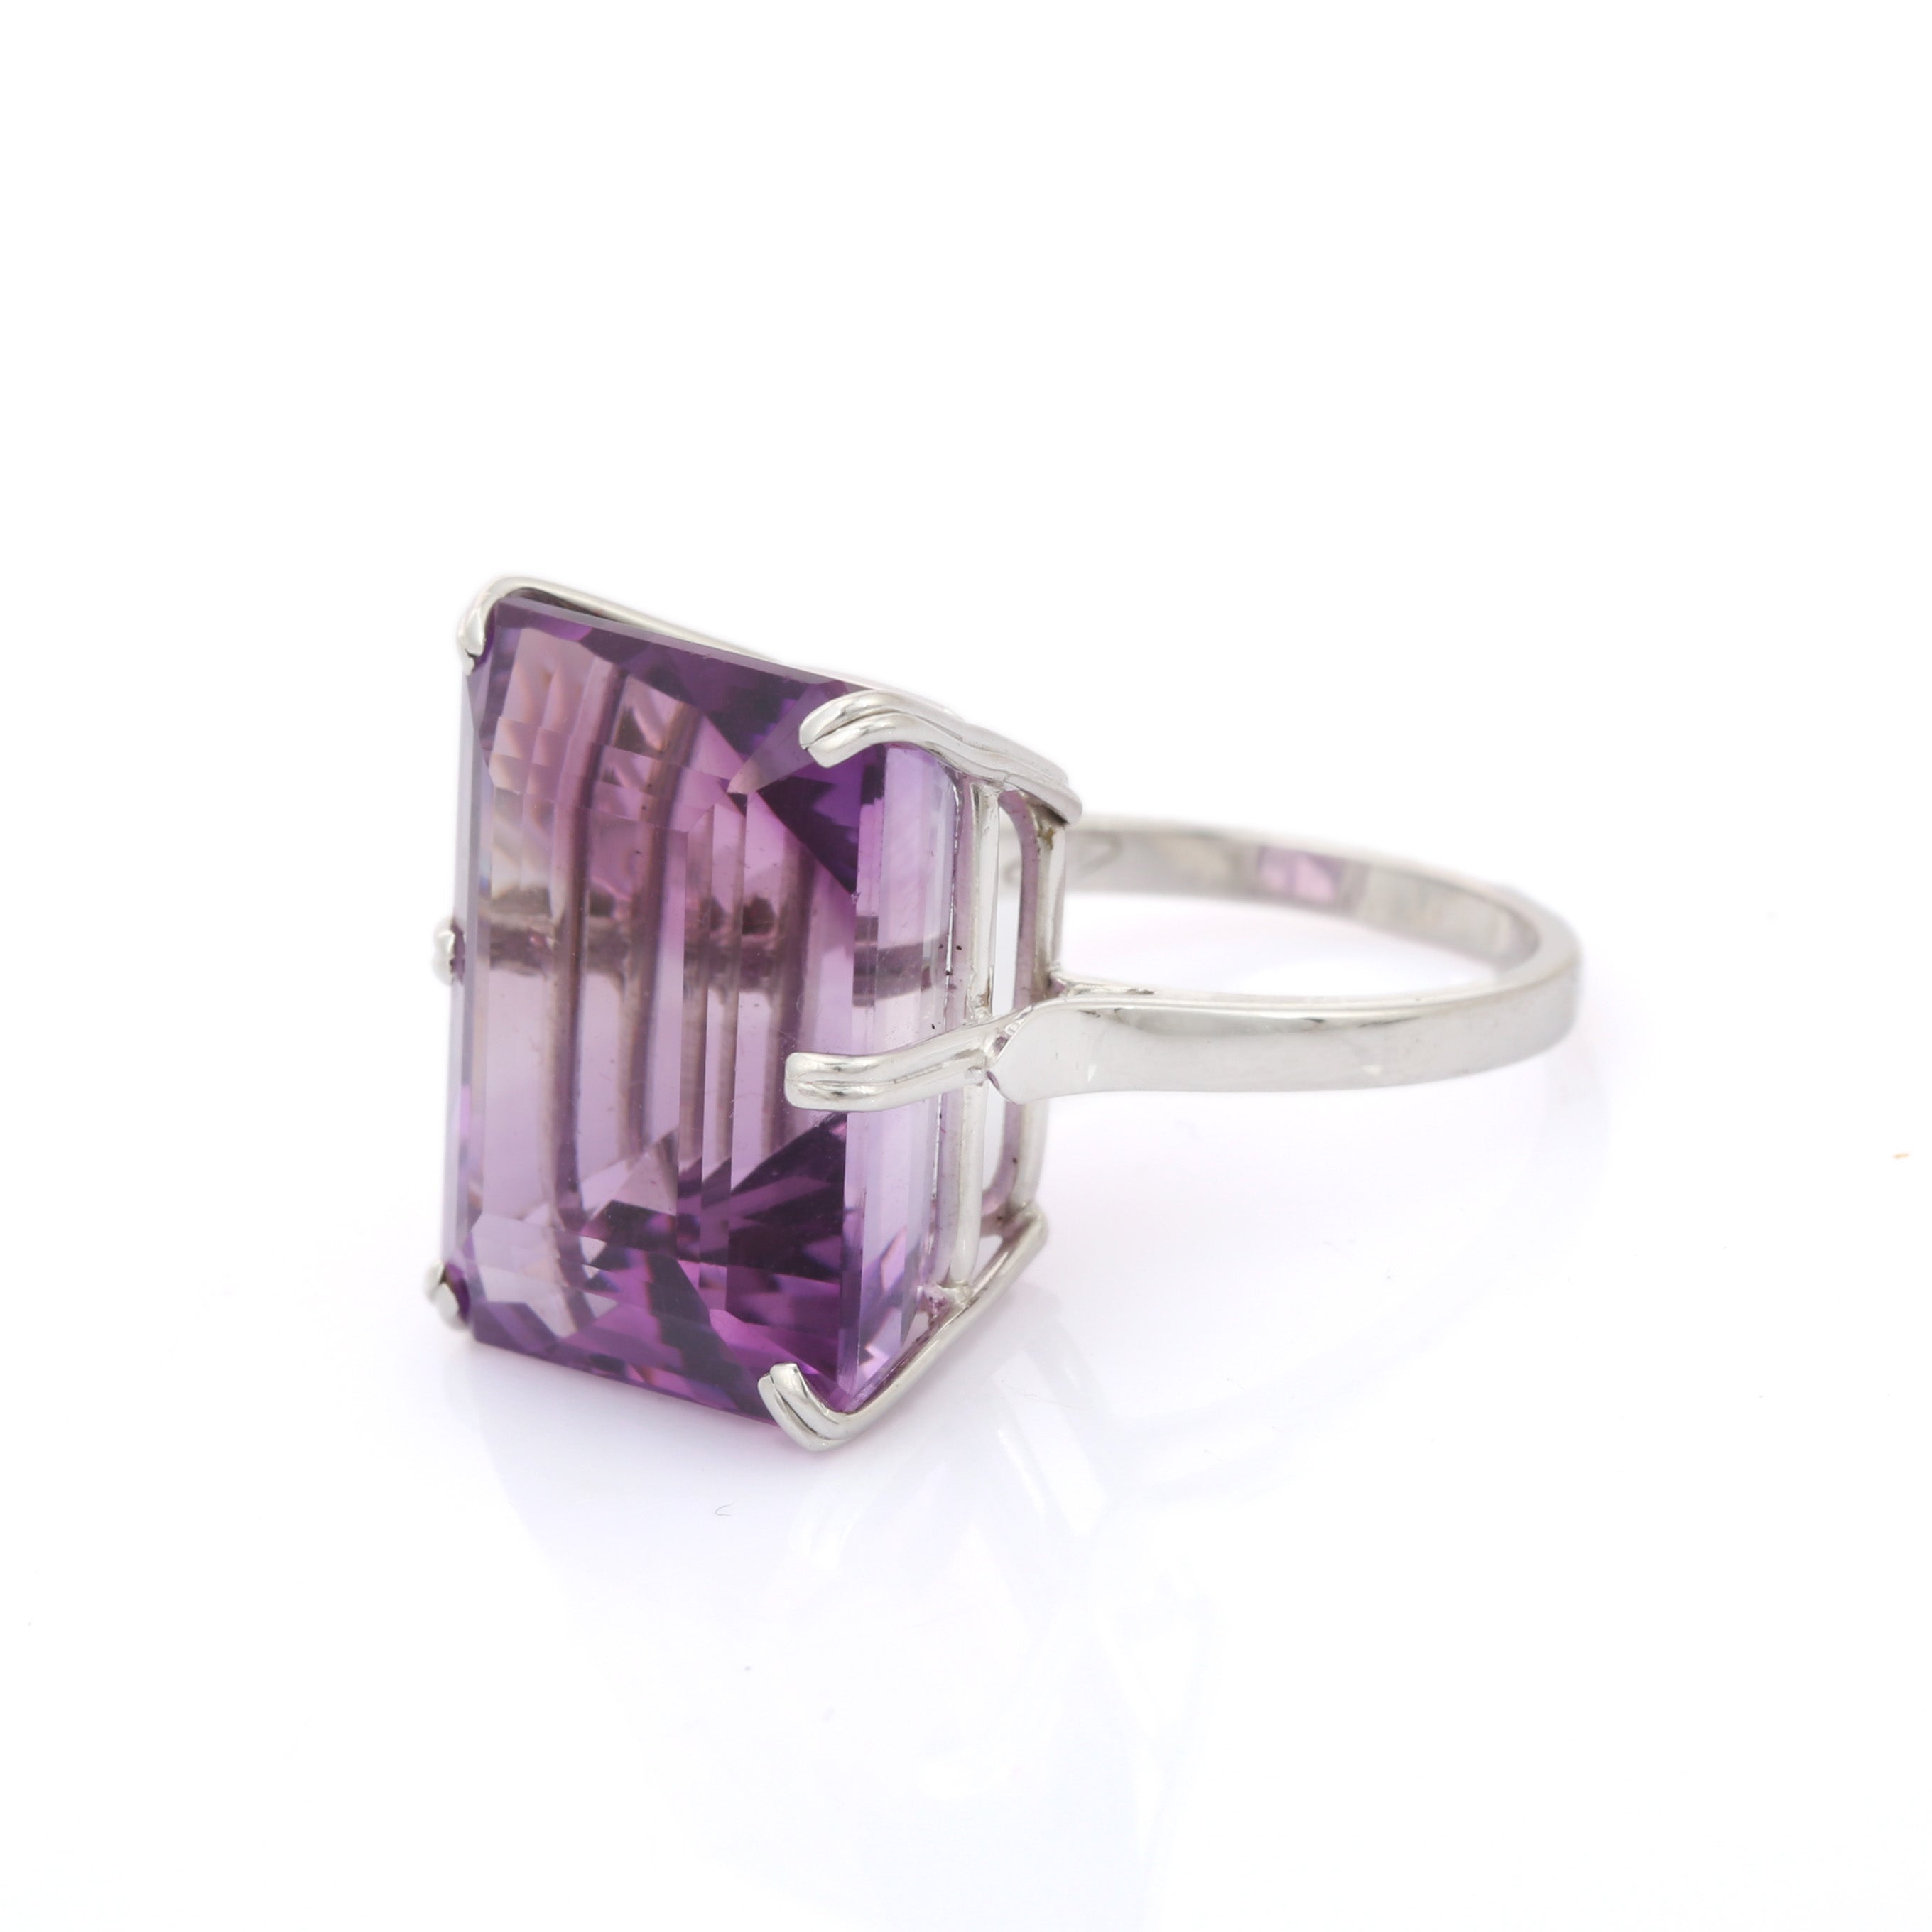 For Sale:  18K White Gold Art Deco Style 23.70 Ct. Octagon Amethyst Cocktail Ring 2